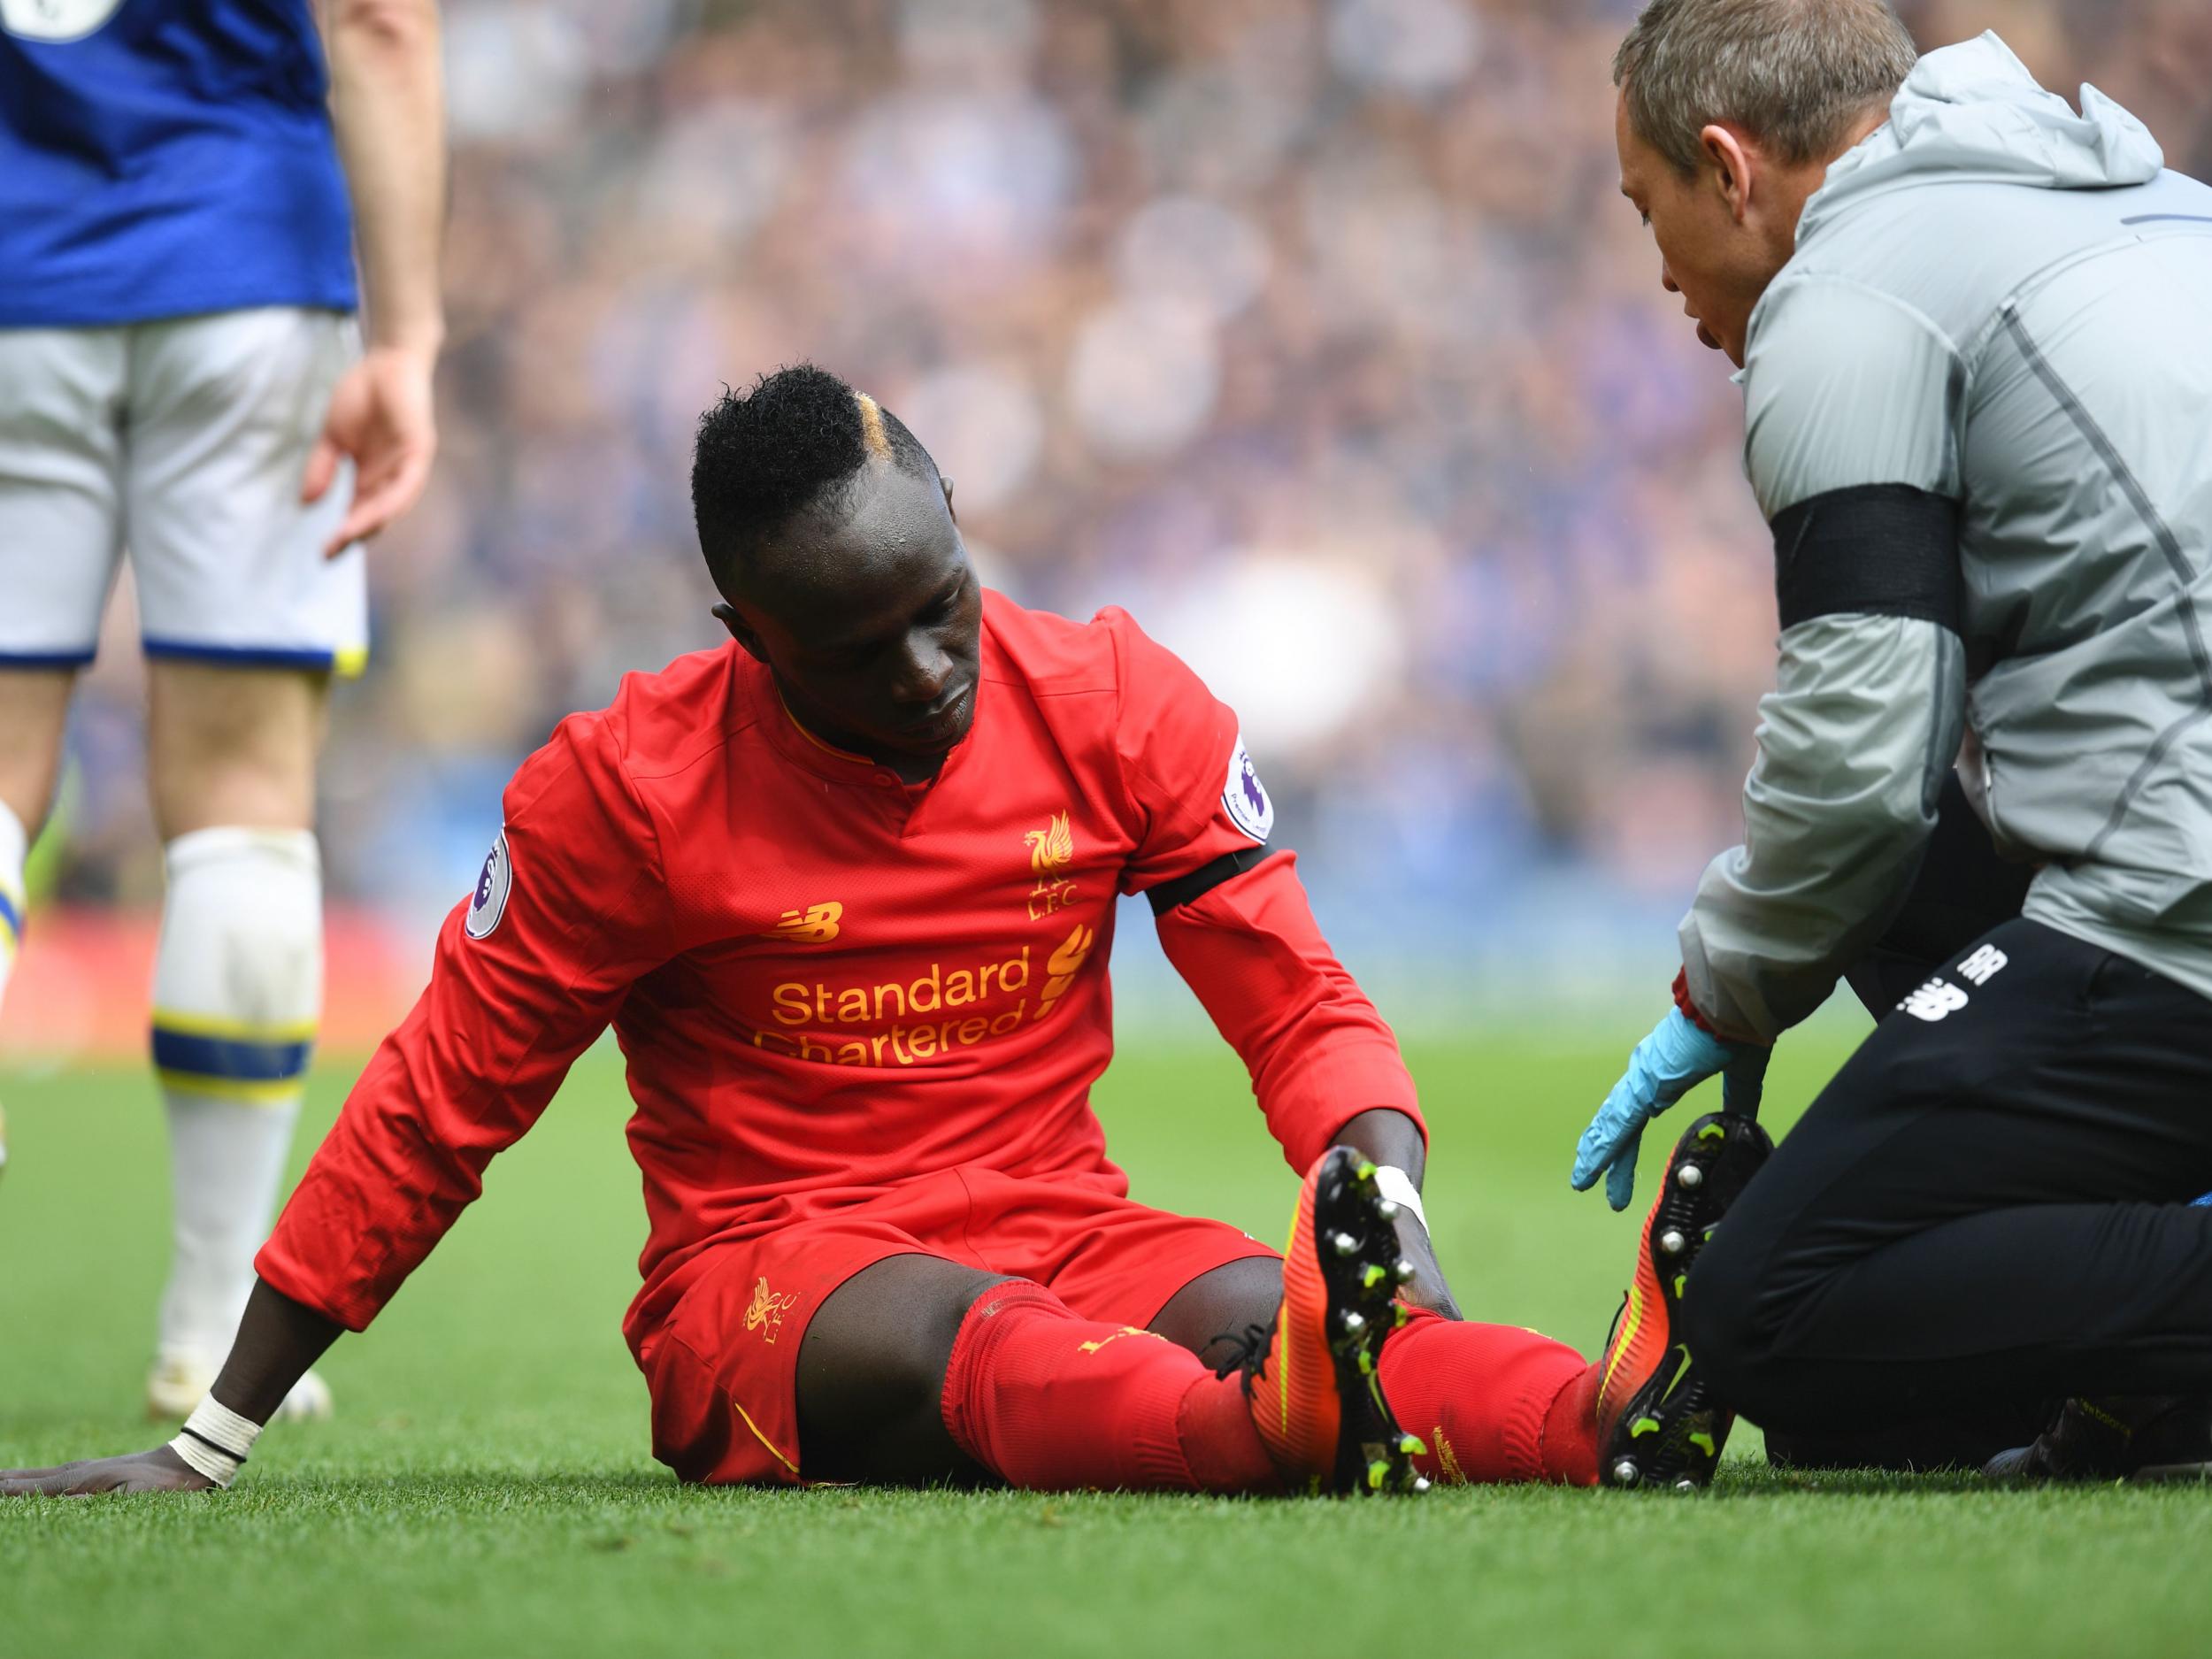 Mane was ruled out for the season with a knee injury suffered against Everton